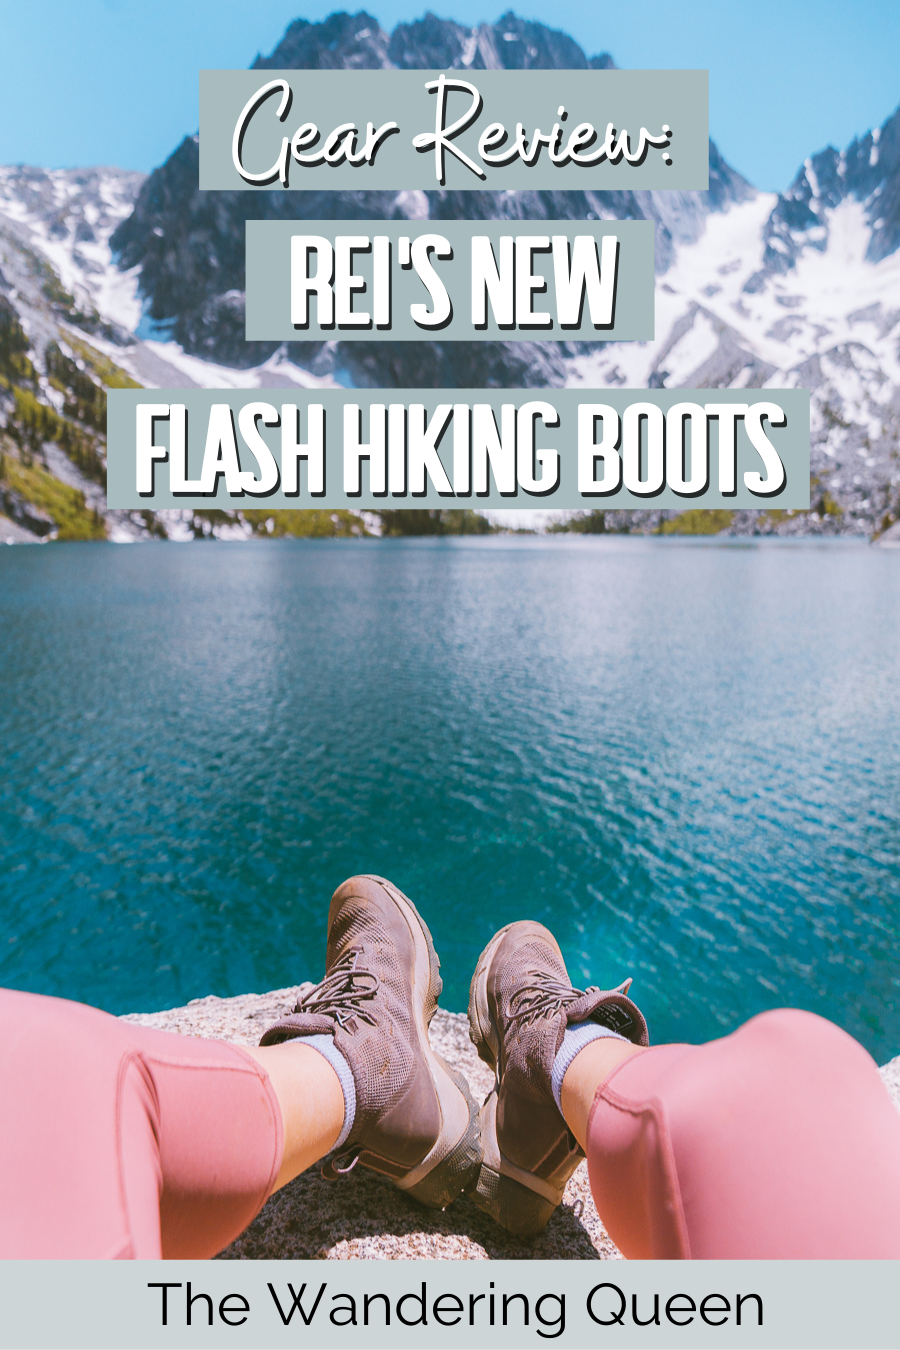 REI Co-op Flash Hiking Boots Review